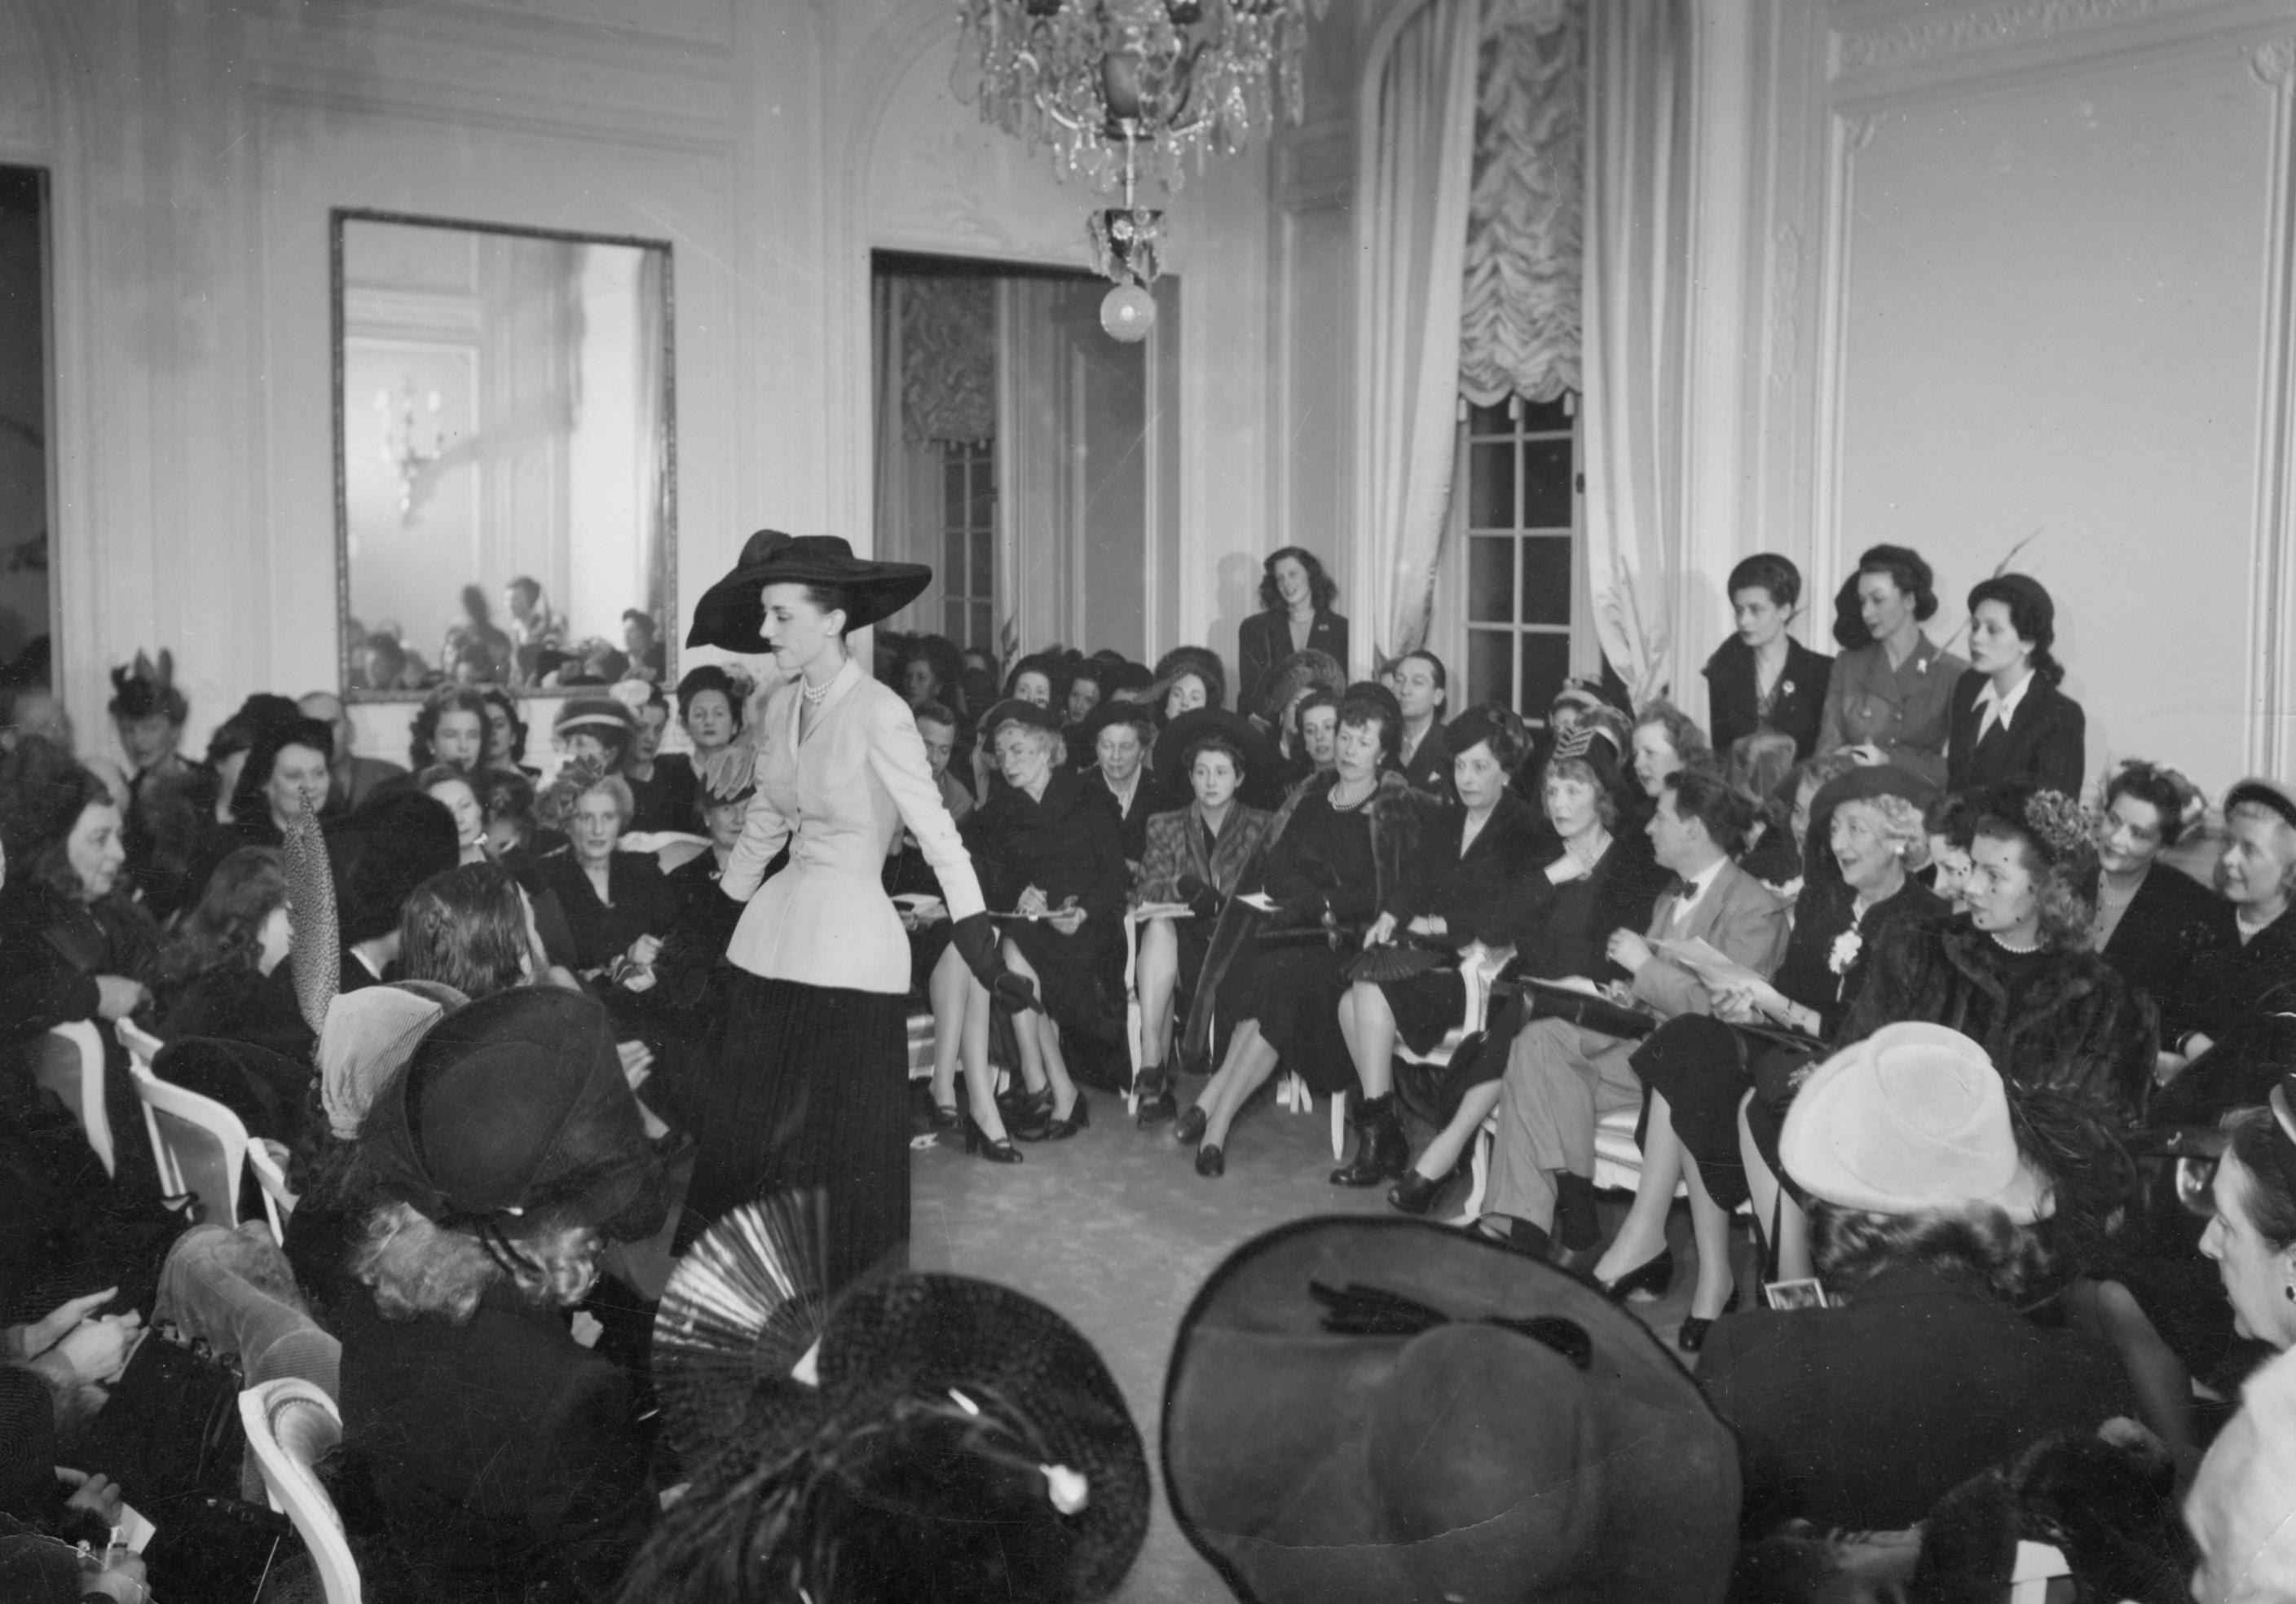 Christian Dior, who has just founded his house, presents his first collection.